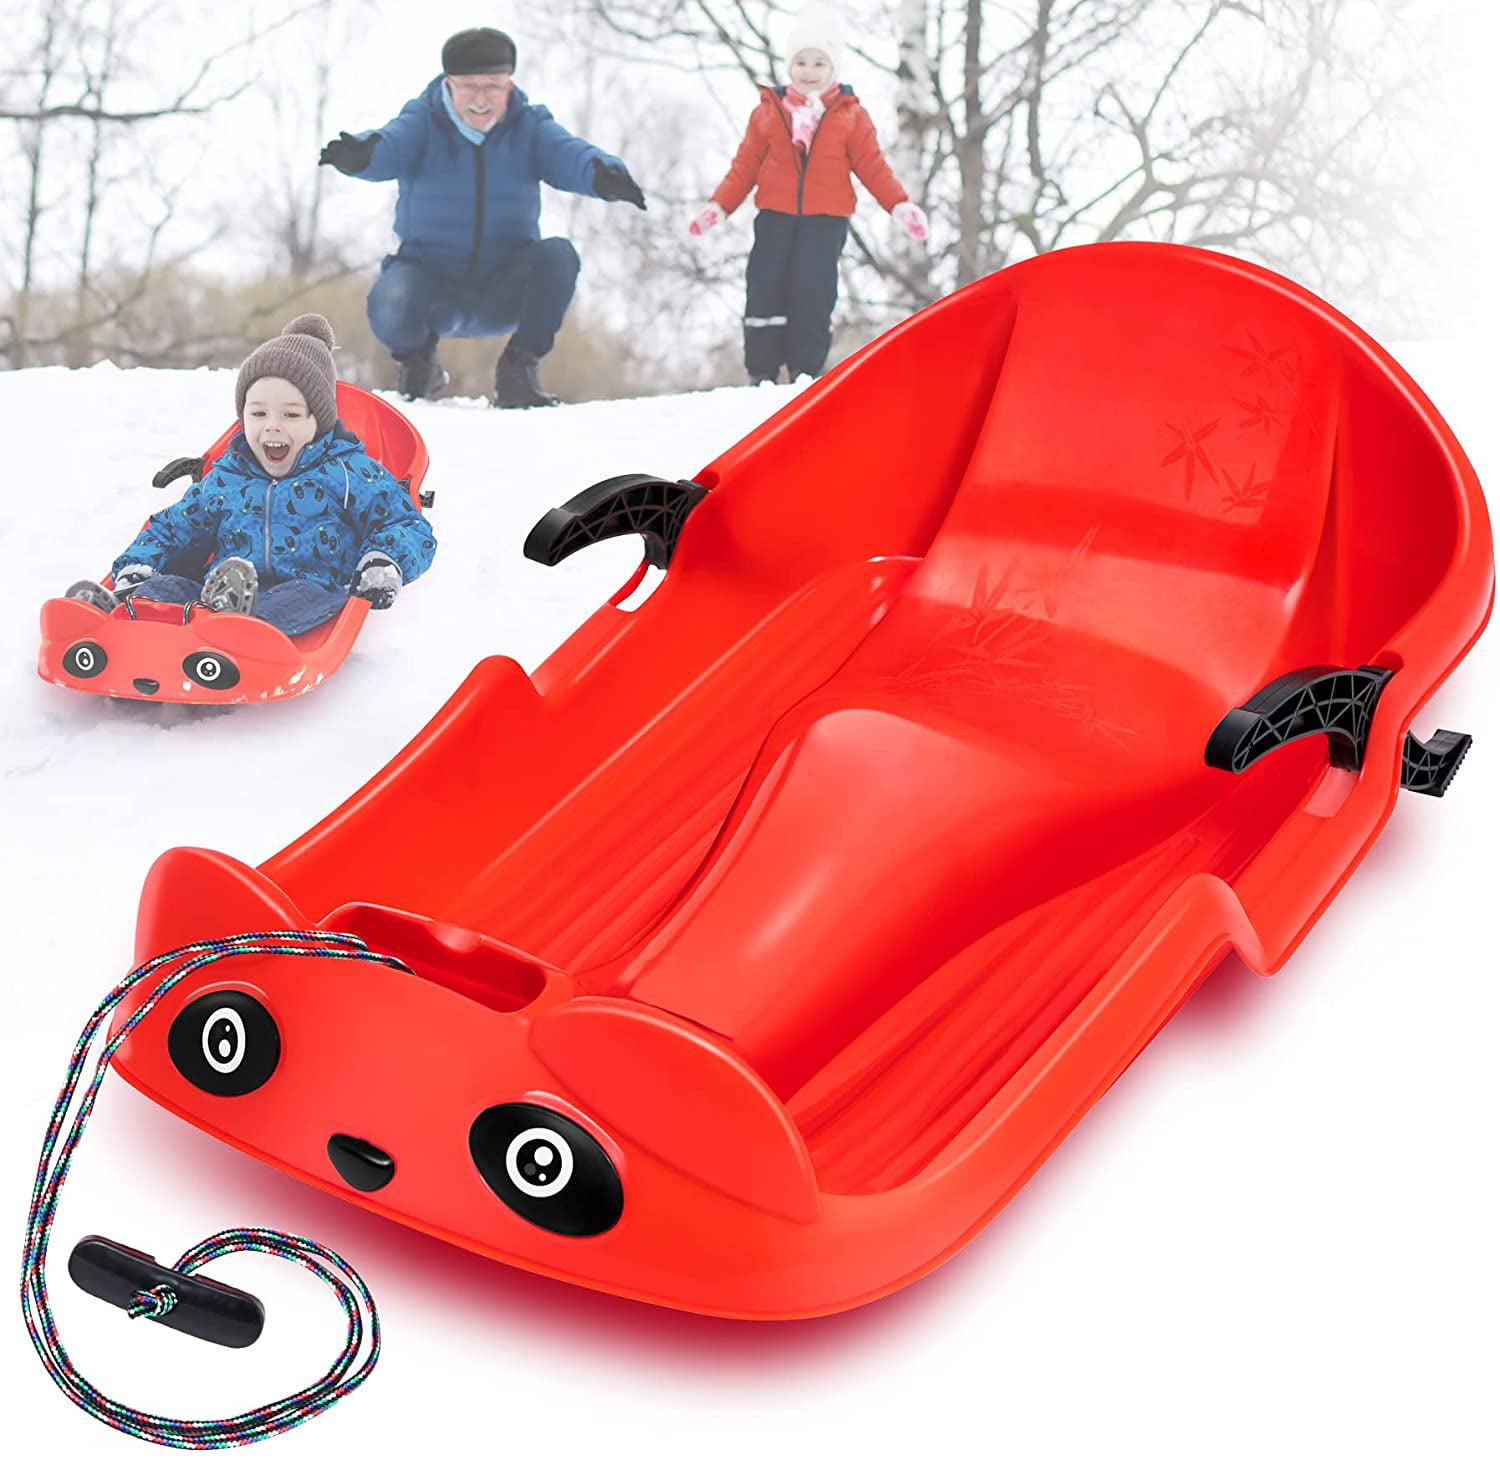 Hinder Outdoor sled snowboard,Snow Sledge High Performance Toboggan Sledge Snow Sand Grass Sledge Slider with Pull Rope for Children Adults